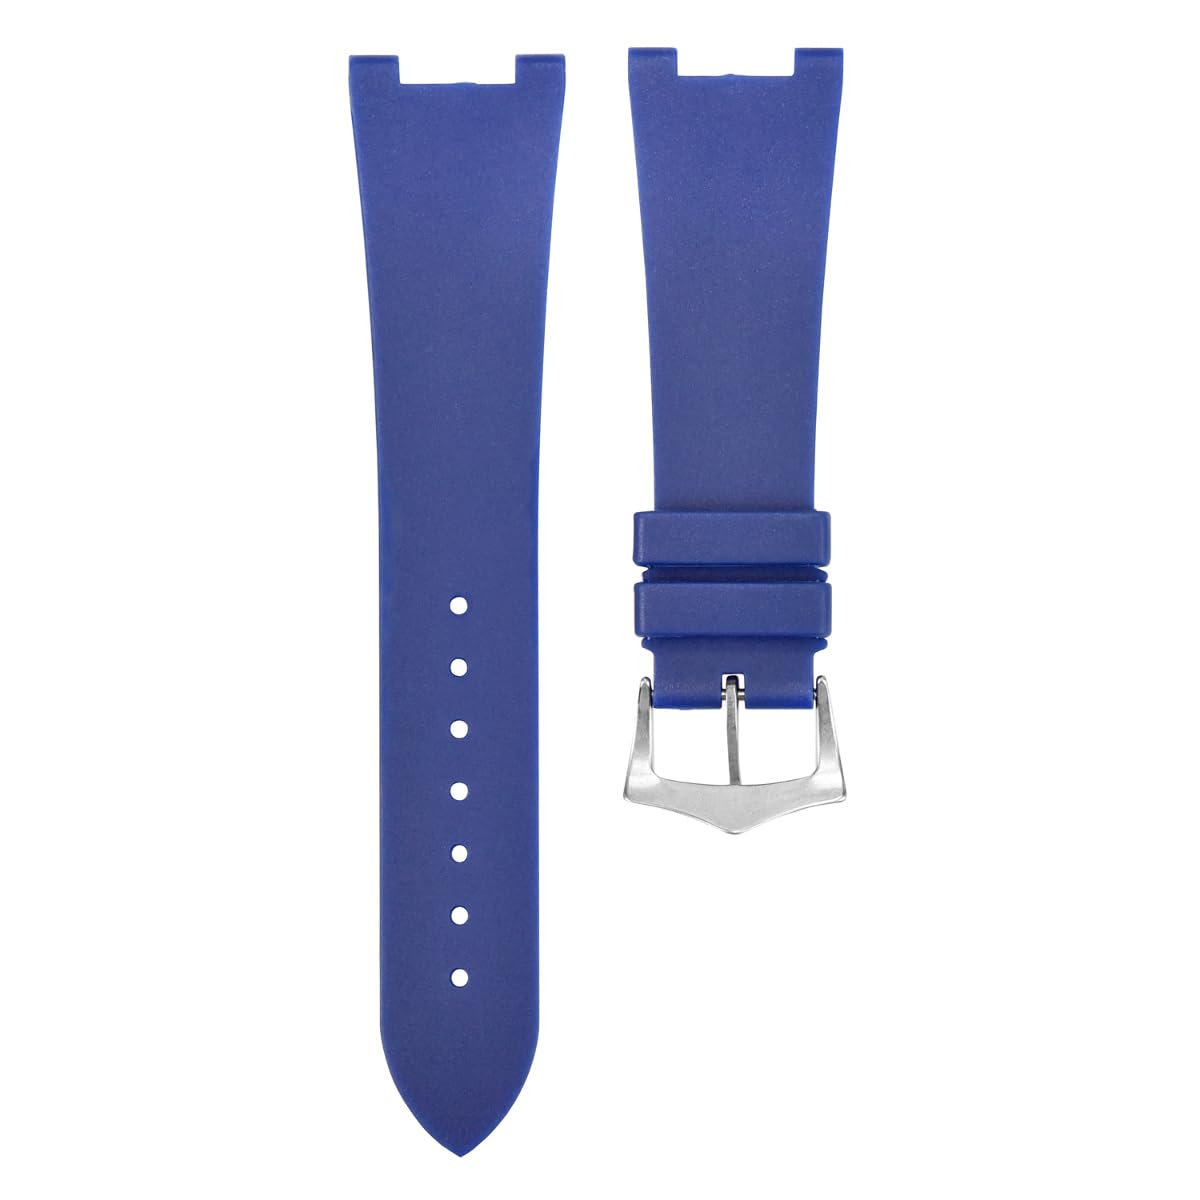 Ewatchparts 25 x 18 RUBBER WATCH STRAP BAND FOR PATEK PHILLIPE NAUTILUS 5712G/R/A,5980R BLUE